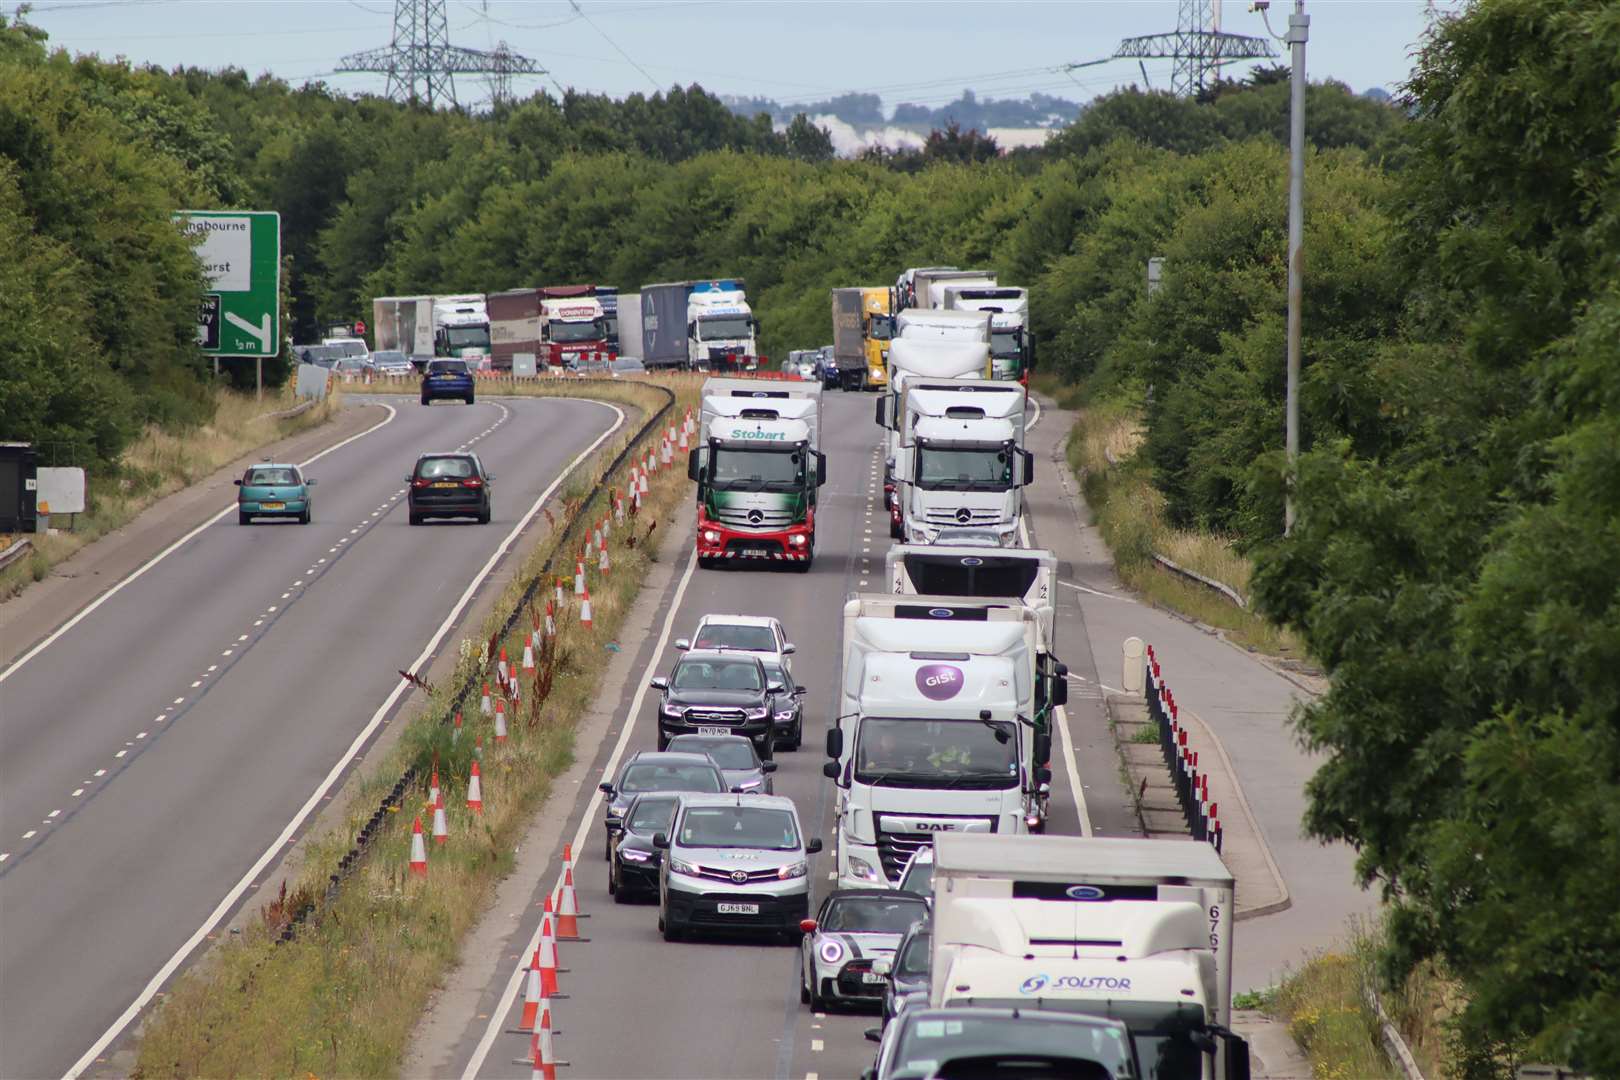 Traffic jam on the A249 at Bobbing after police close road for incident at Key Street